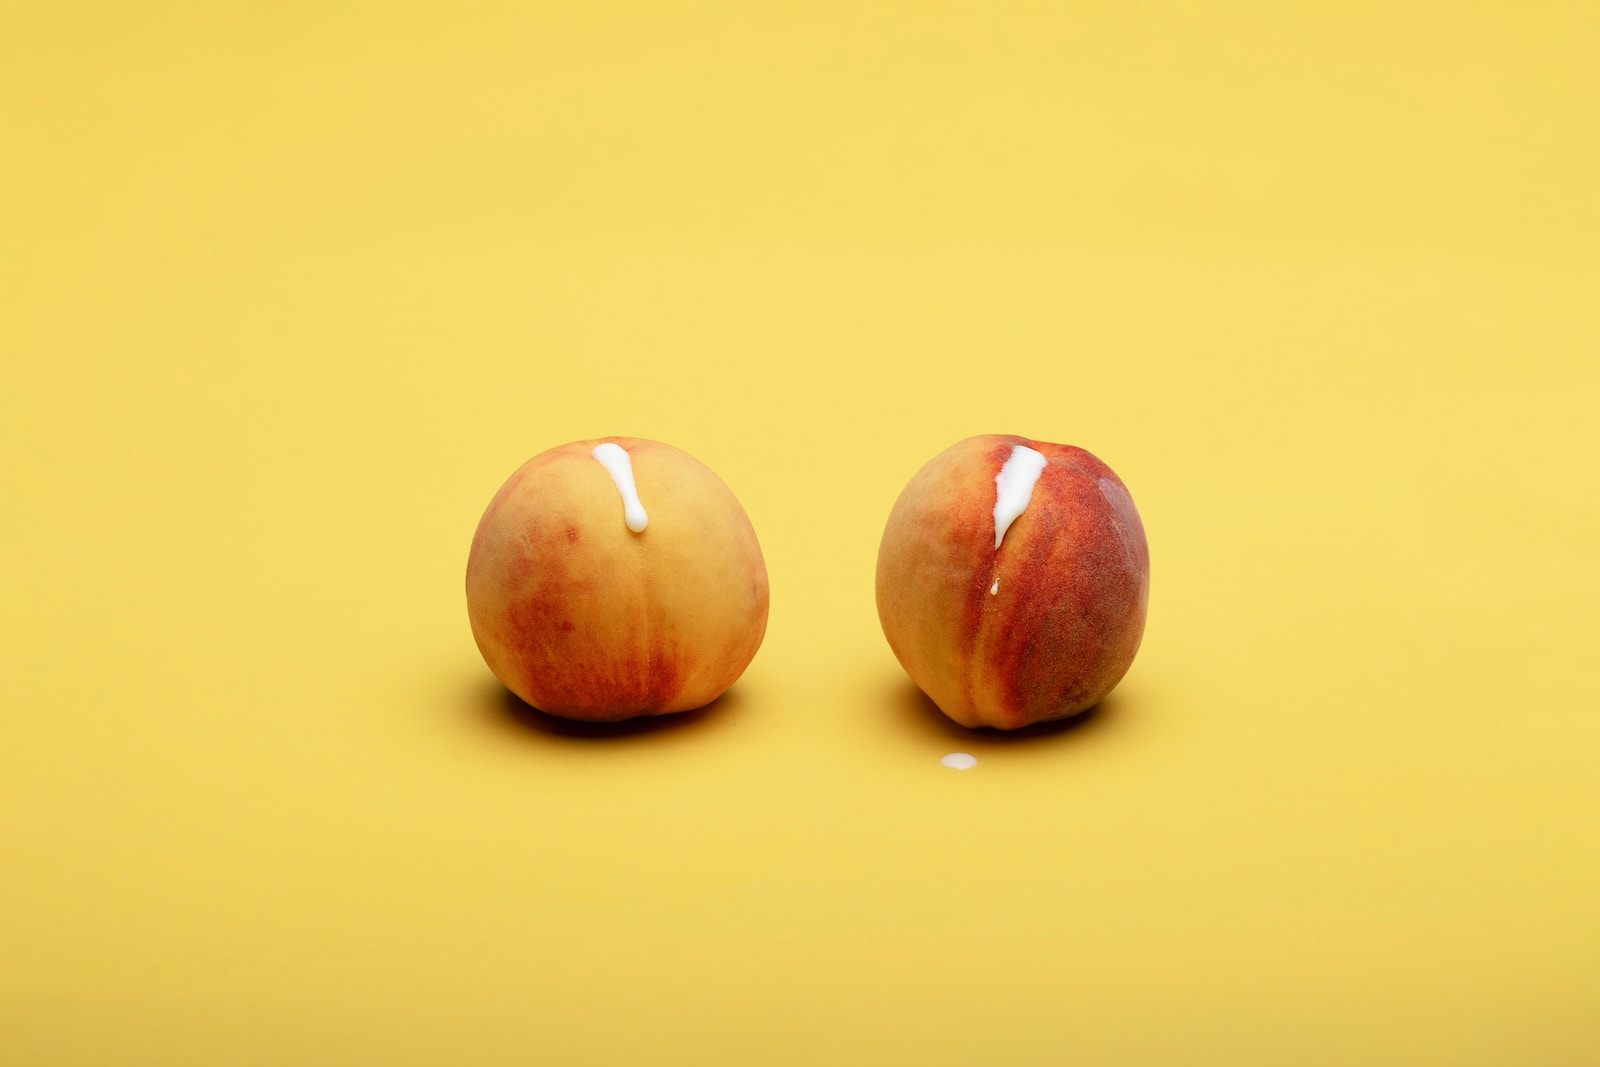 2 red apples on yellow surface